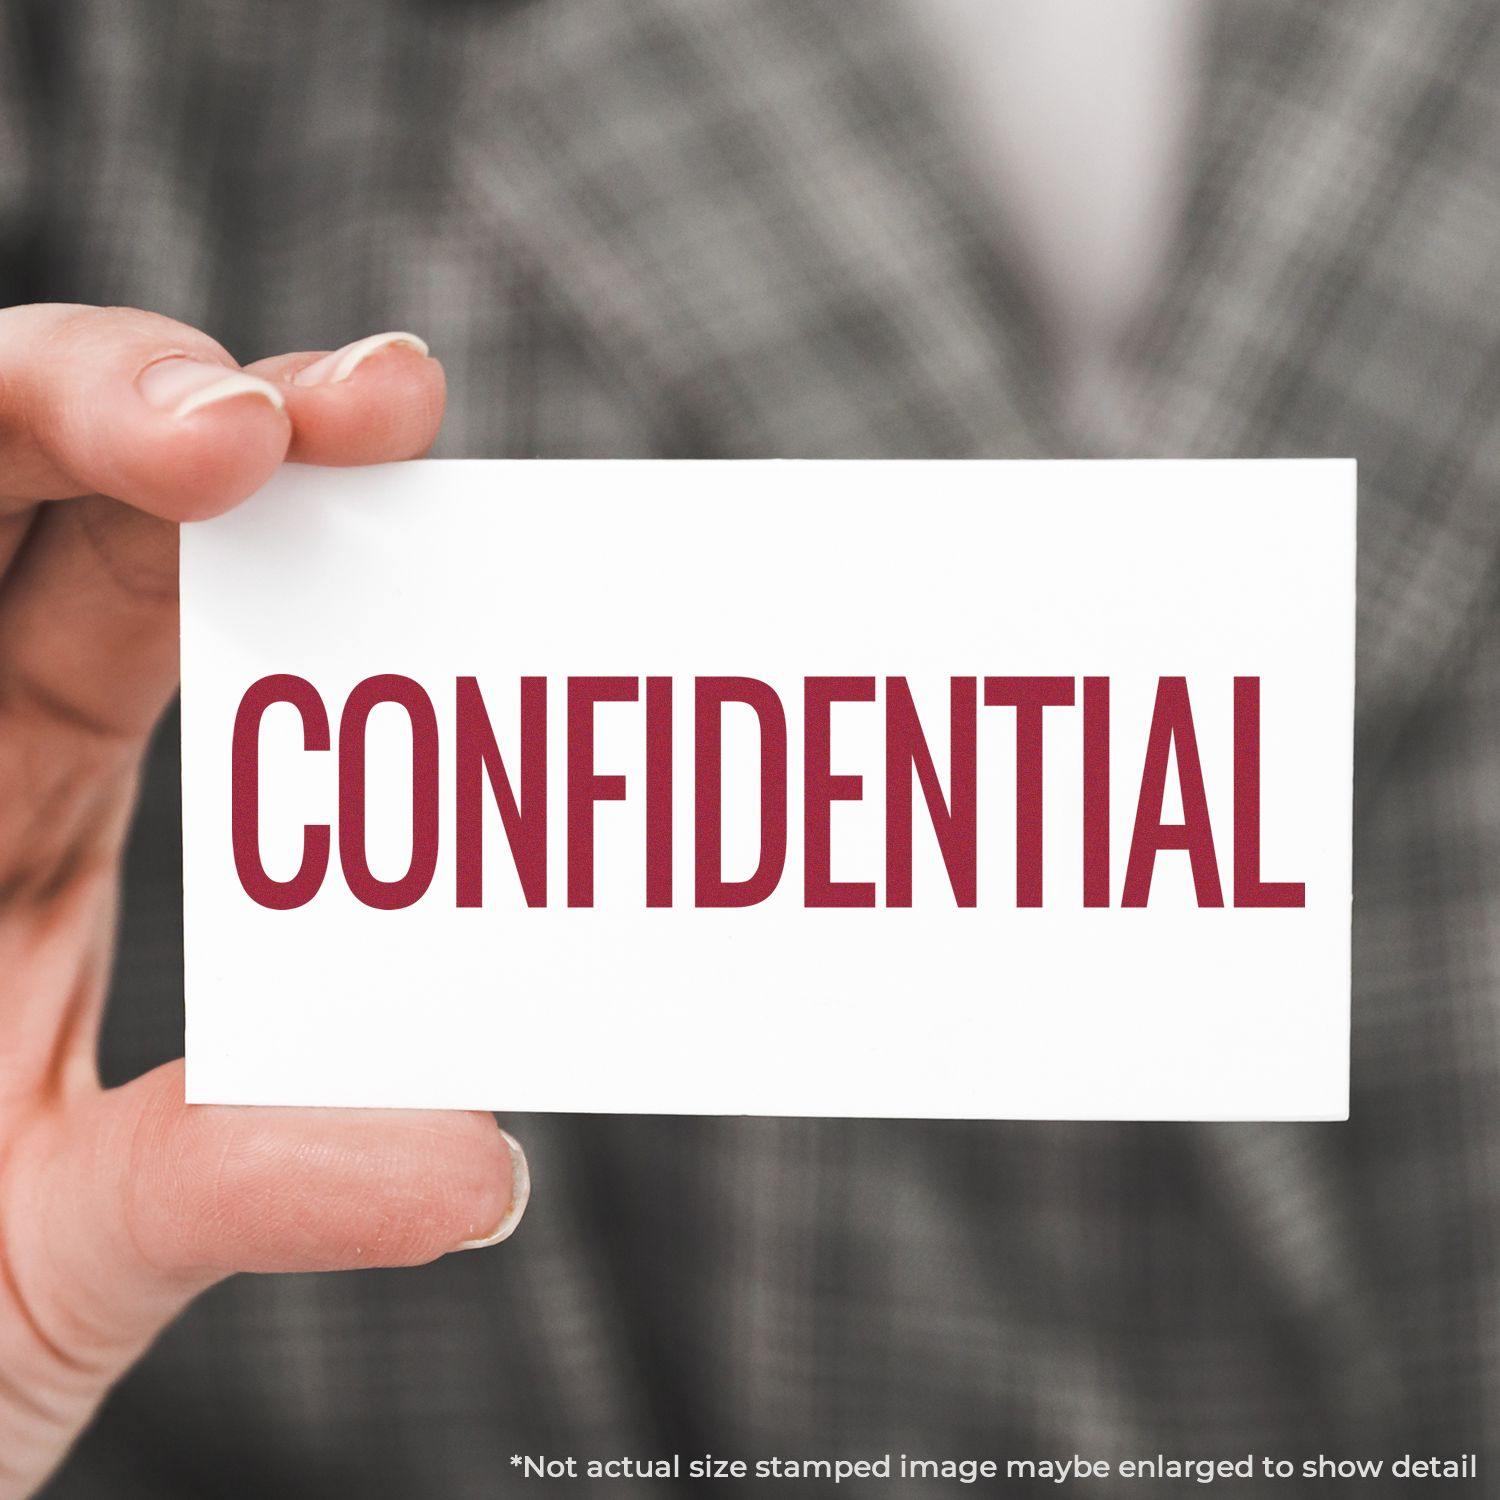 A stock office rubber stamp with a stamped image showing how the text "CONFIDENTIAL" in a narrow font is displayed after stamping.